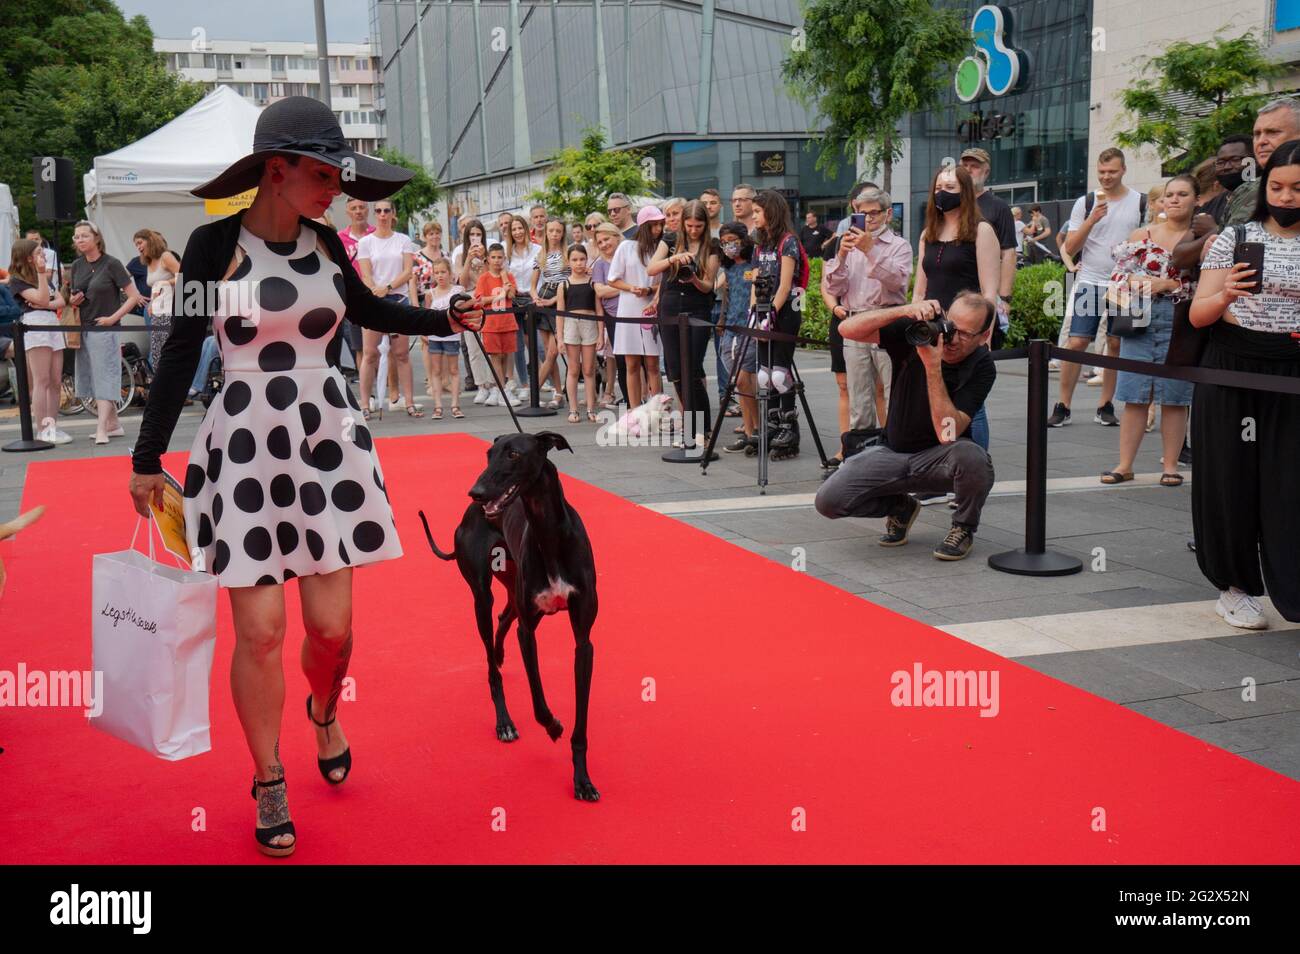 Budapest, Hungary. 12th June, 2021. A dog with its owner participates in the Dogs on the Red Carpet fashion show in Budapest, Hungary, June 12, 2021. Credit: Attila Volgyi/Xinhua/Alamy Live News Stock Photo